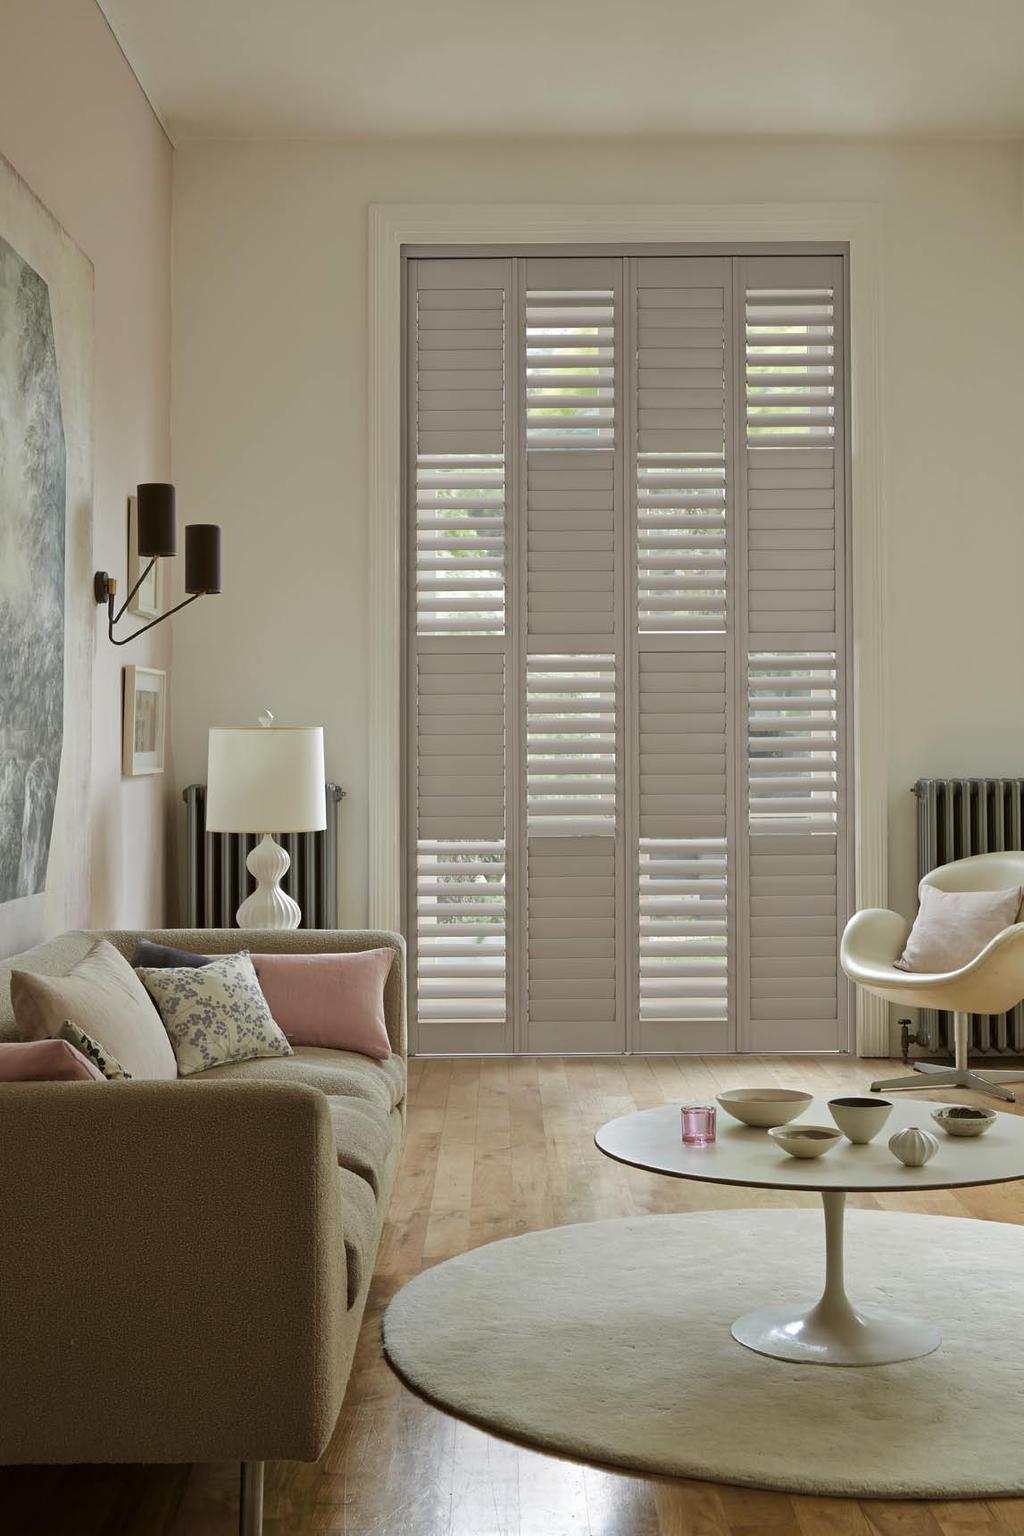 Extremely flexible, shutters can be made to fit almost any